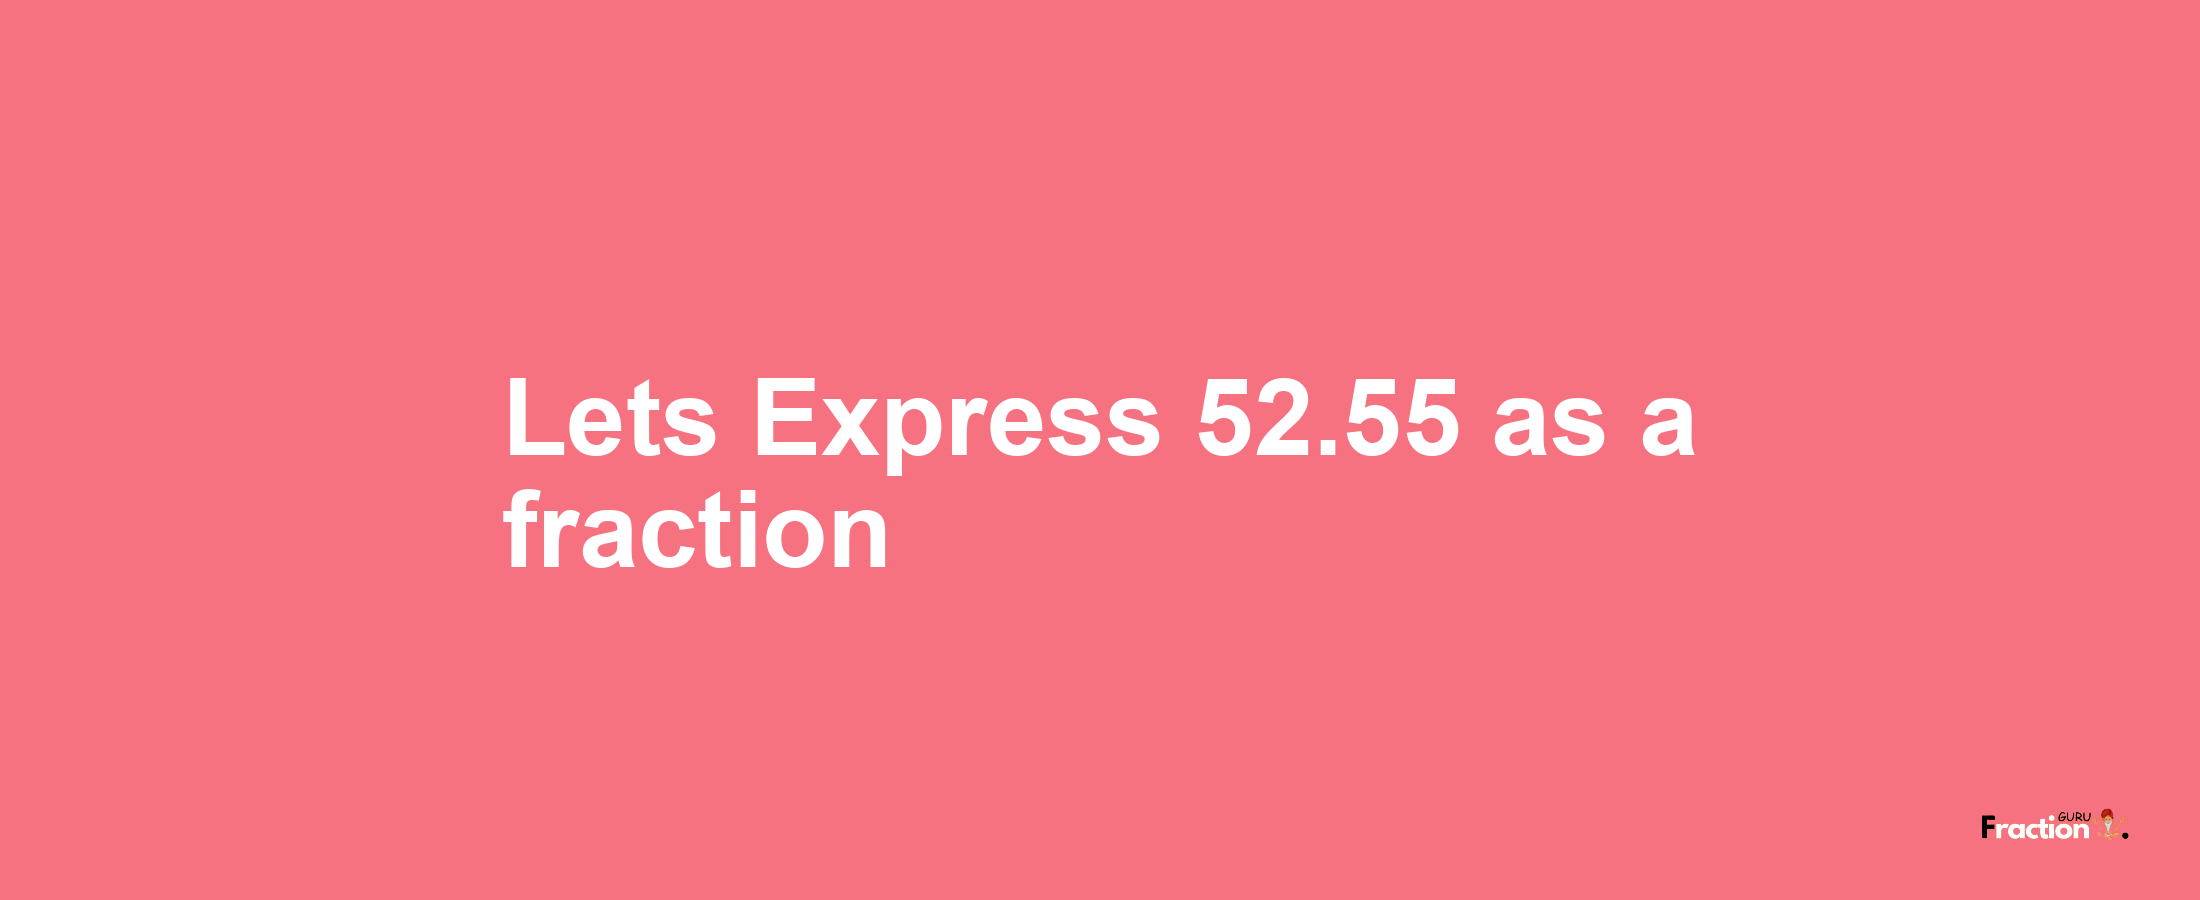 Lets Express 52.55 as afraction